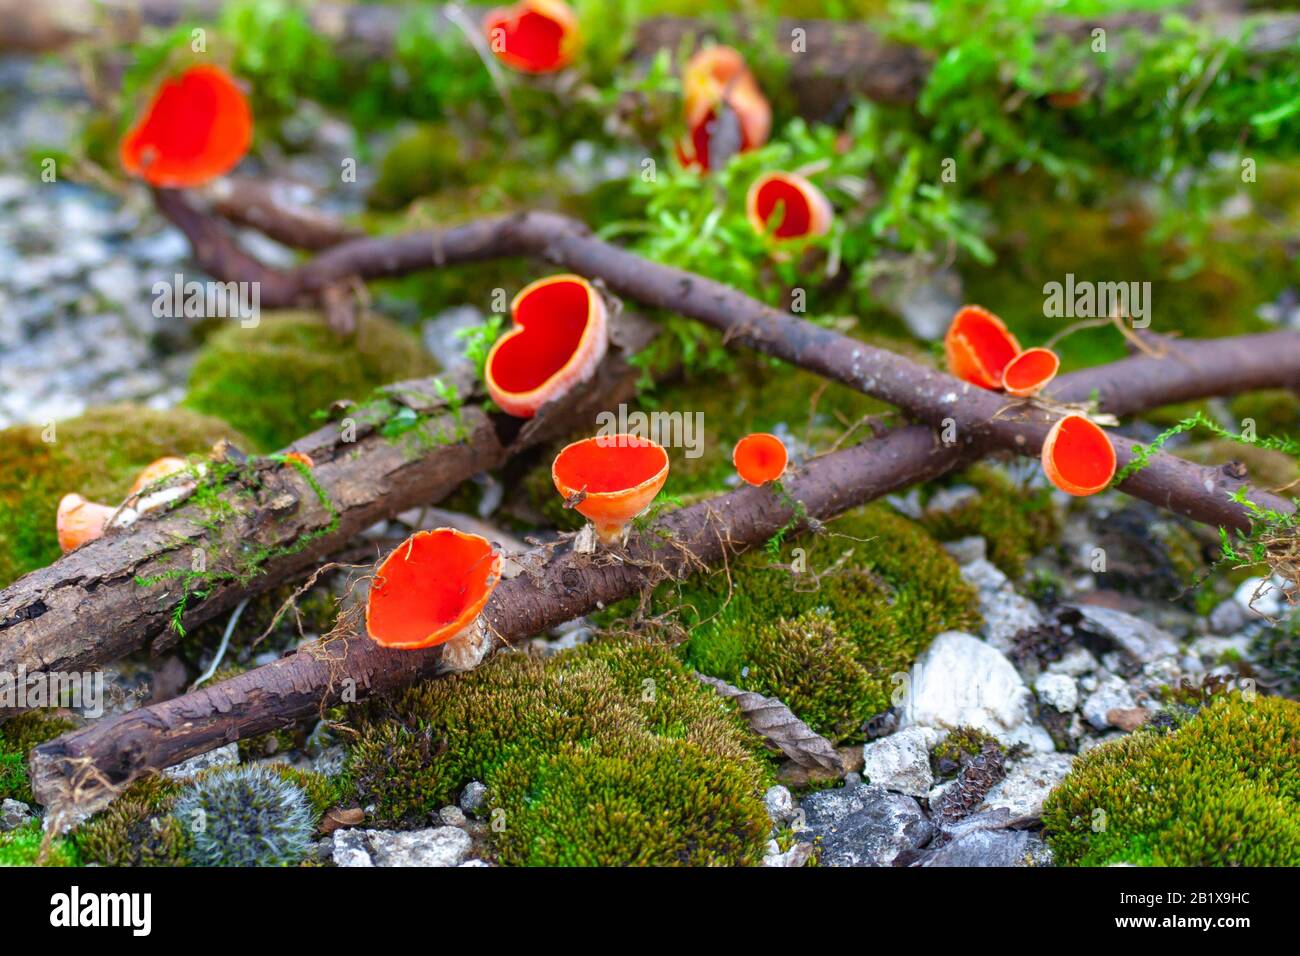 Sarcoscypha coccinea, commonly known as the scarlet elf cup, scarlet elf cap, or the scarlet cup on the mossy rock Stock Photo